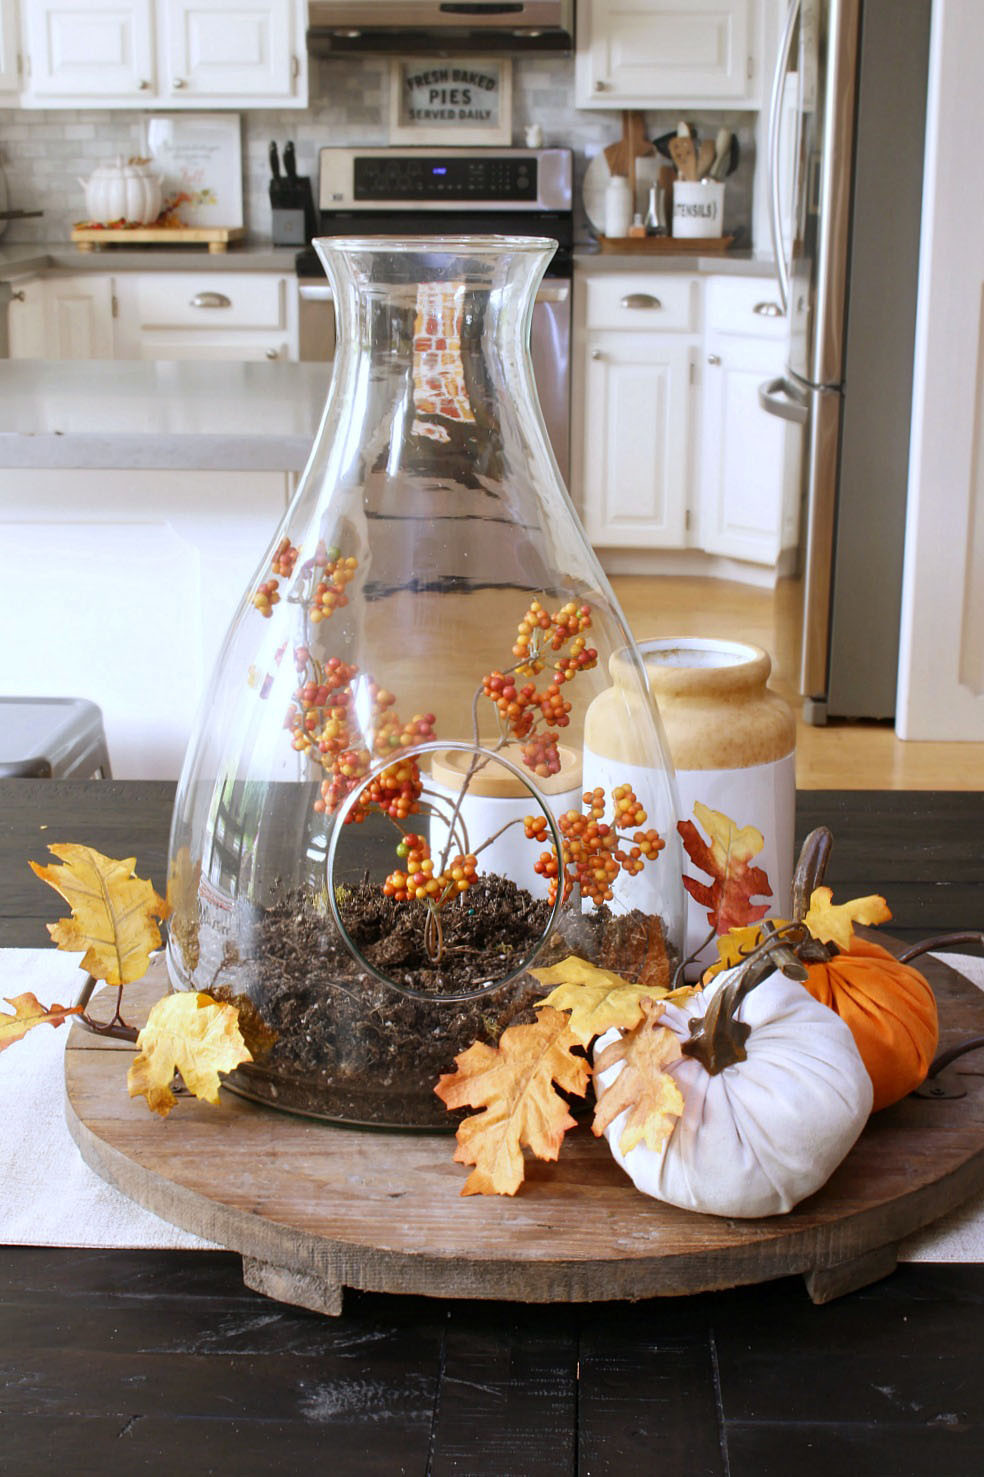 At Home Fall Decor
 Fall Home Decor Ideas Fall Home Tours Clean and Scentsible